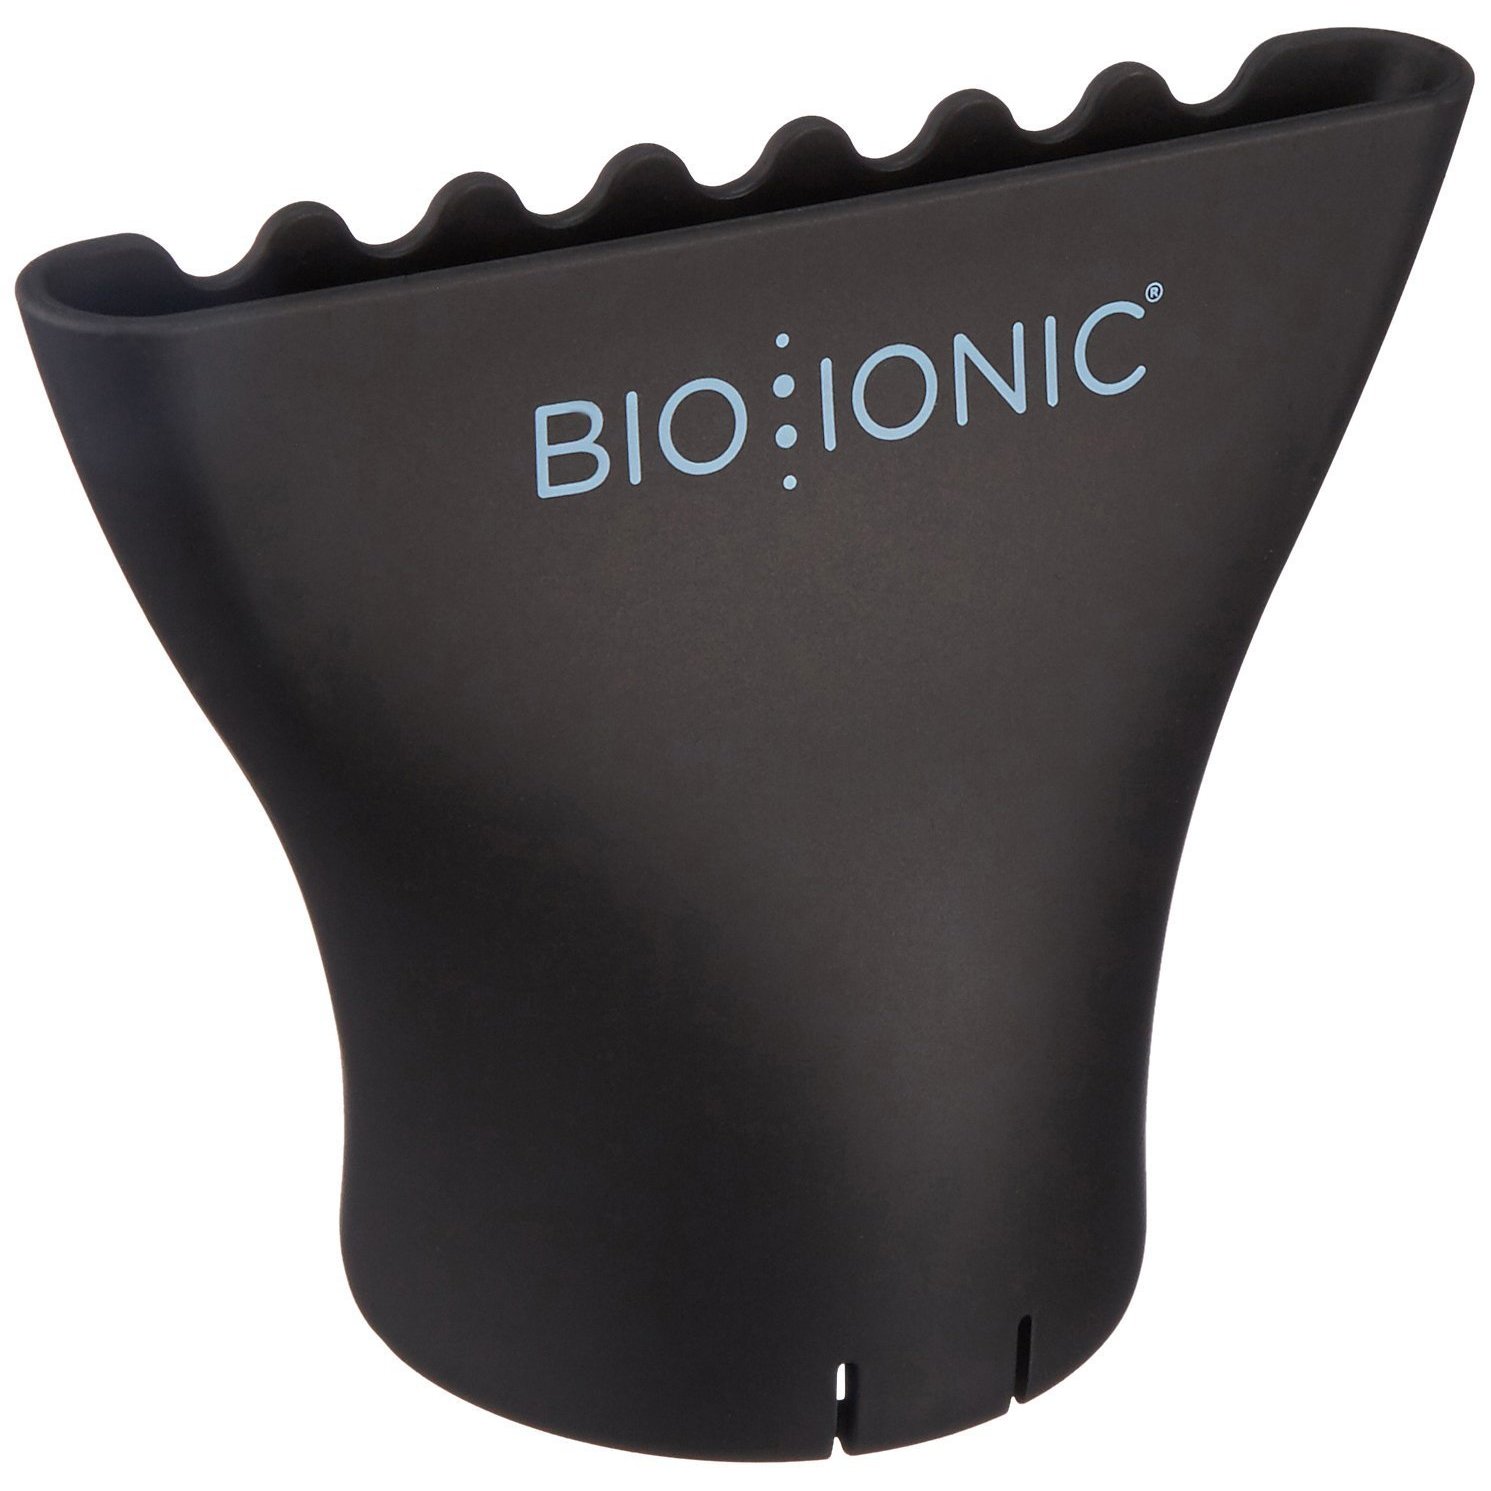 Bio Ionic 10X Volcanic Mx Professional Hair Dryers, Black with Concentrator - image 2 of 4